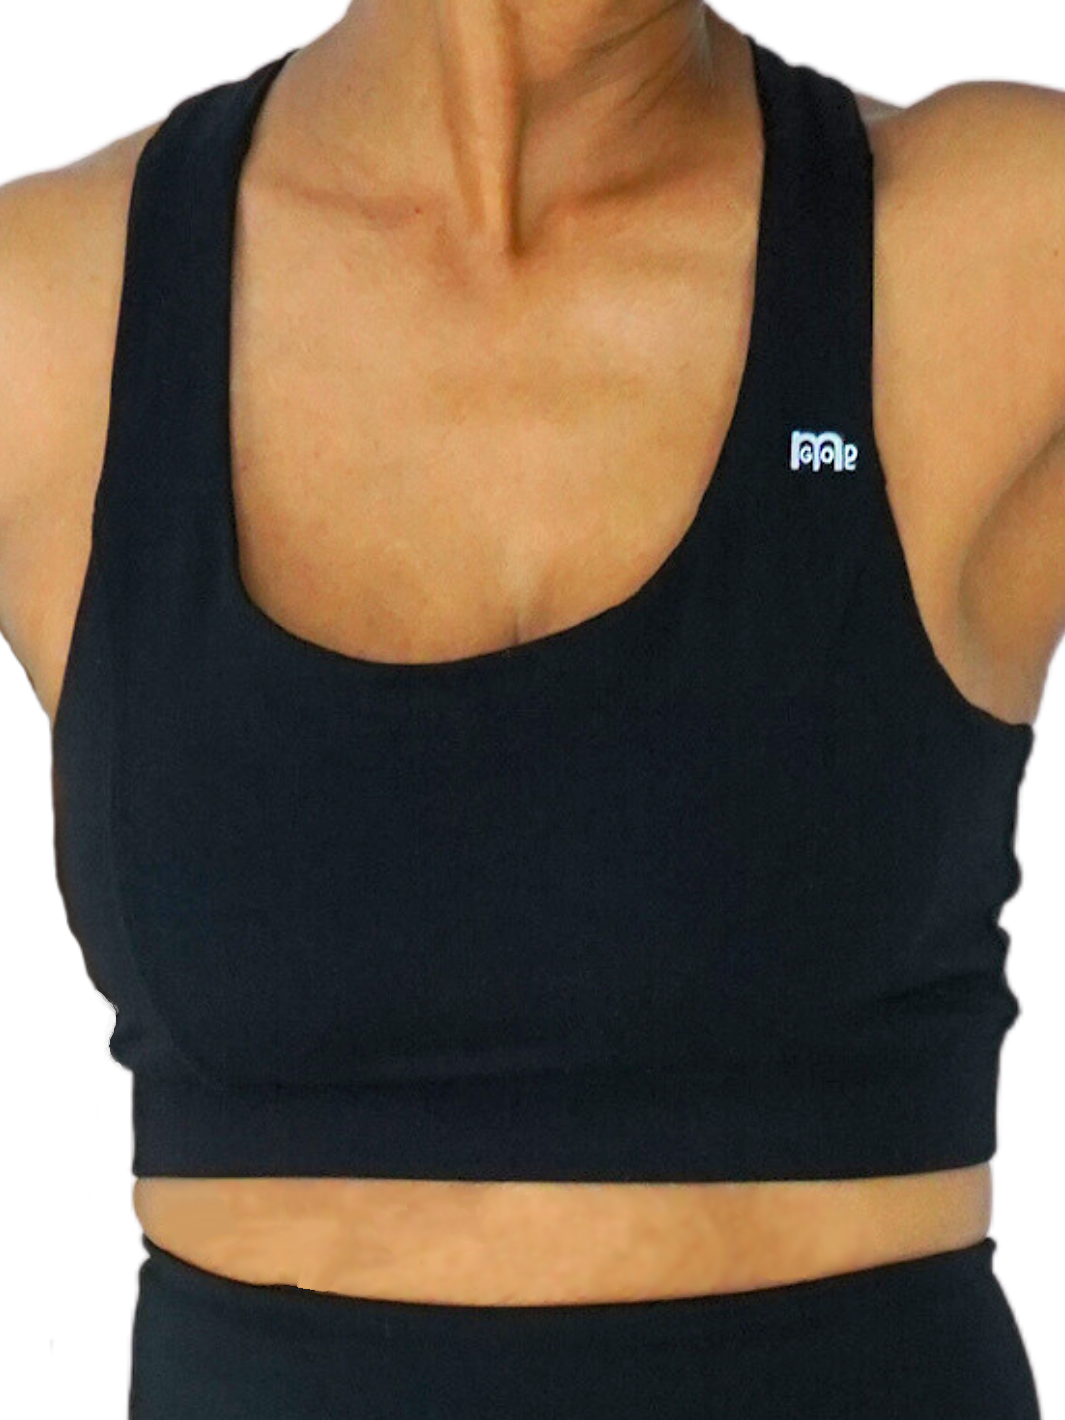 Black sports/workout bra with classic front straps and logo printed on left; Y-Back racer design for maximum support (Godinme printed in center); removable pads, moisture-wicking fabric for added comfort,  and four-way stretch allowing for full range of motion. 